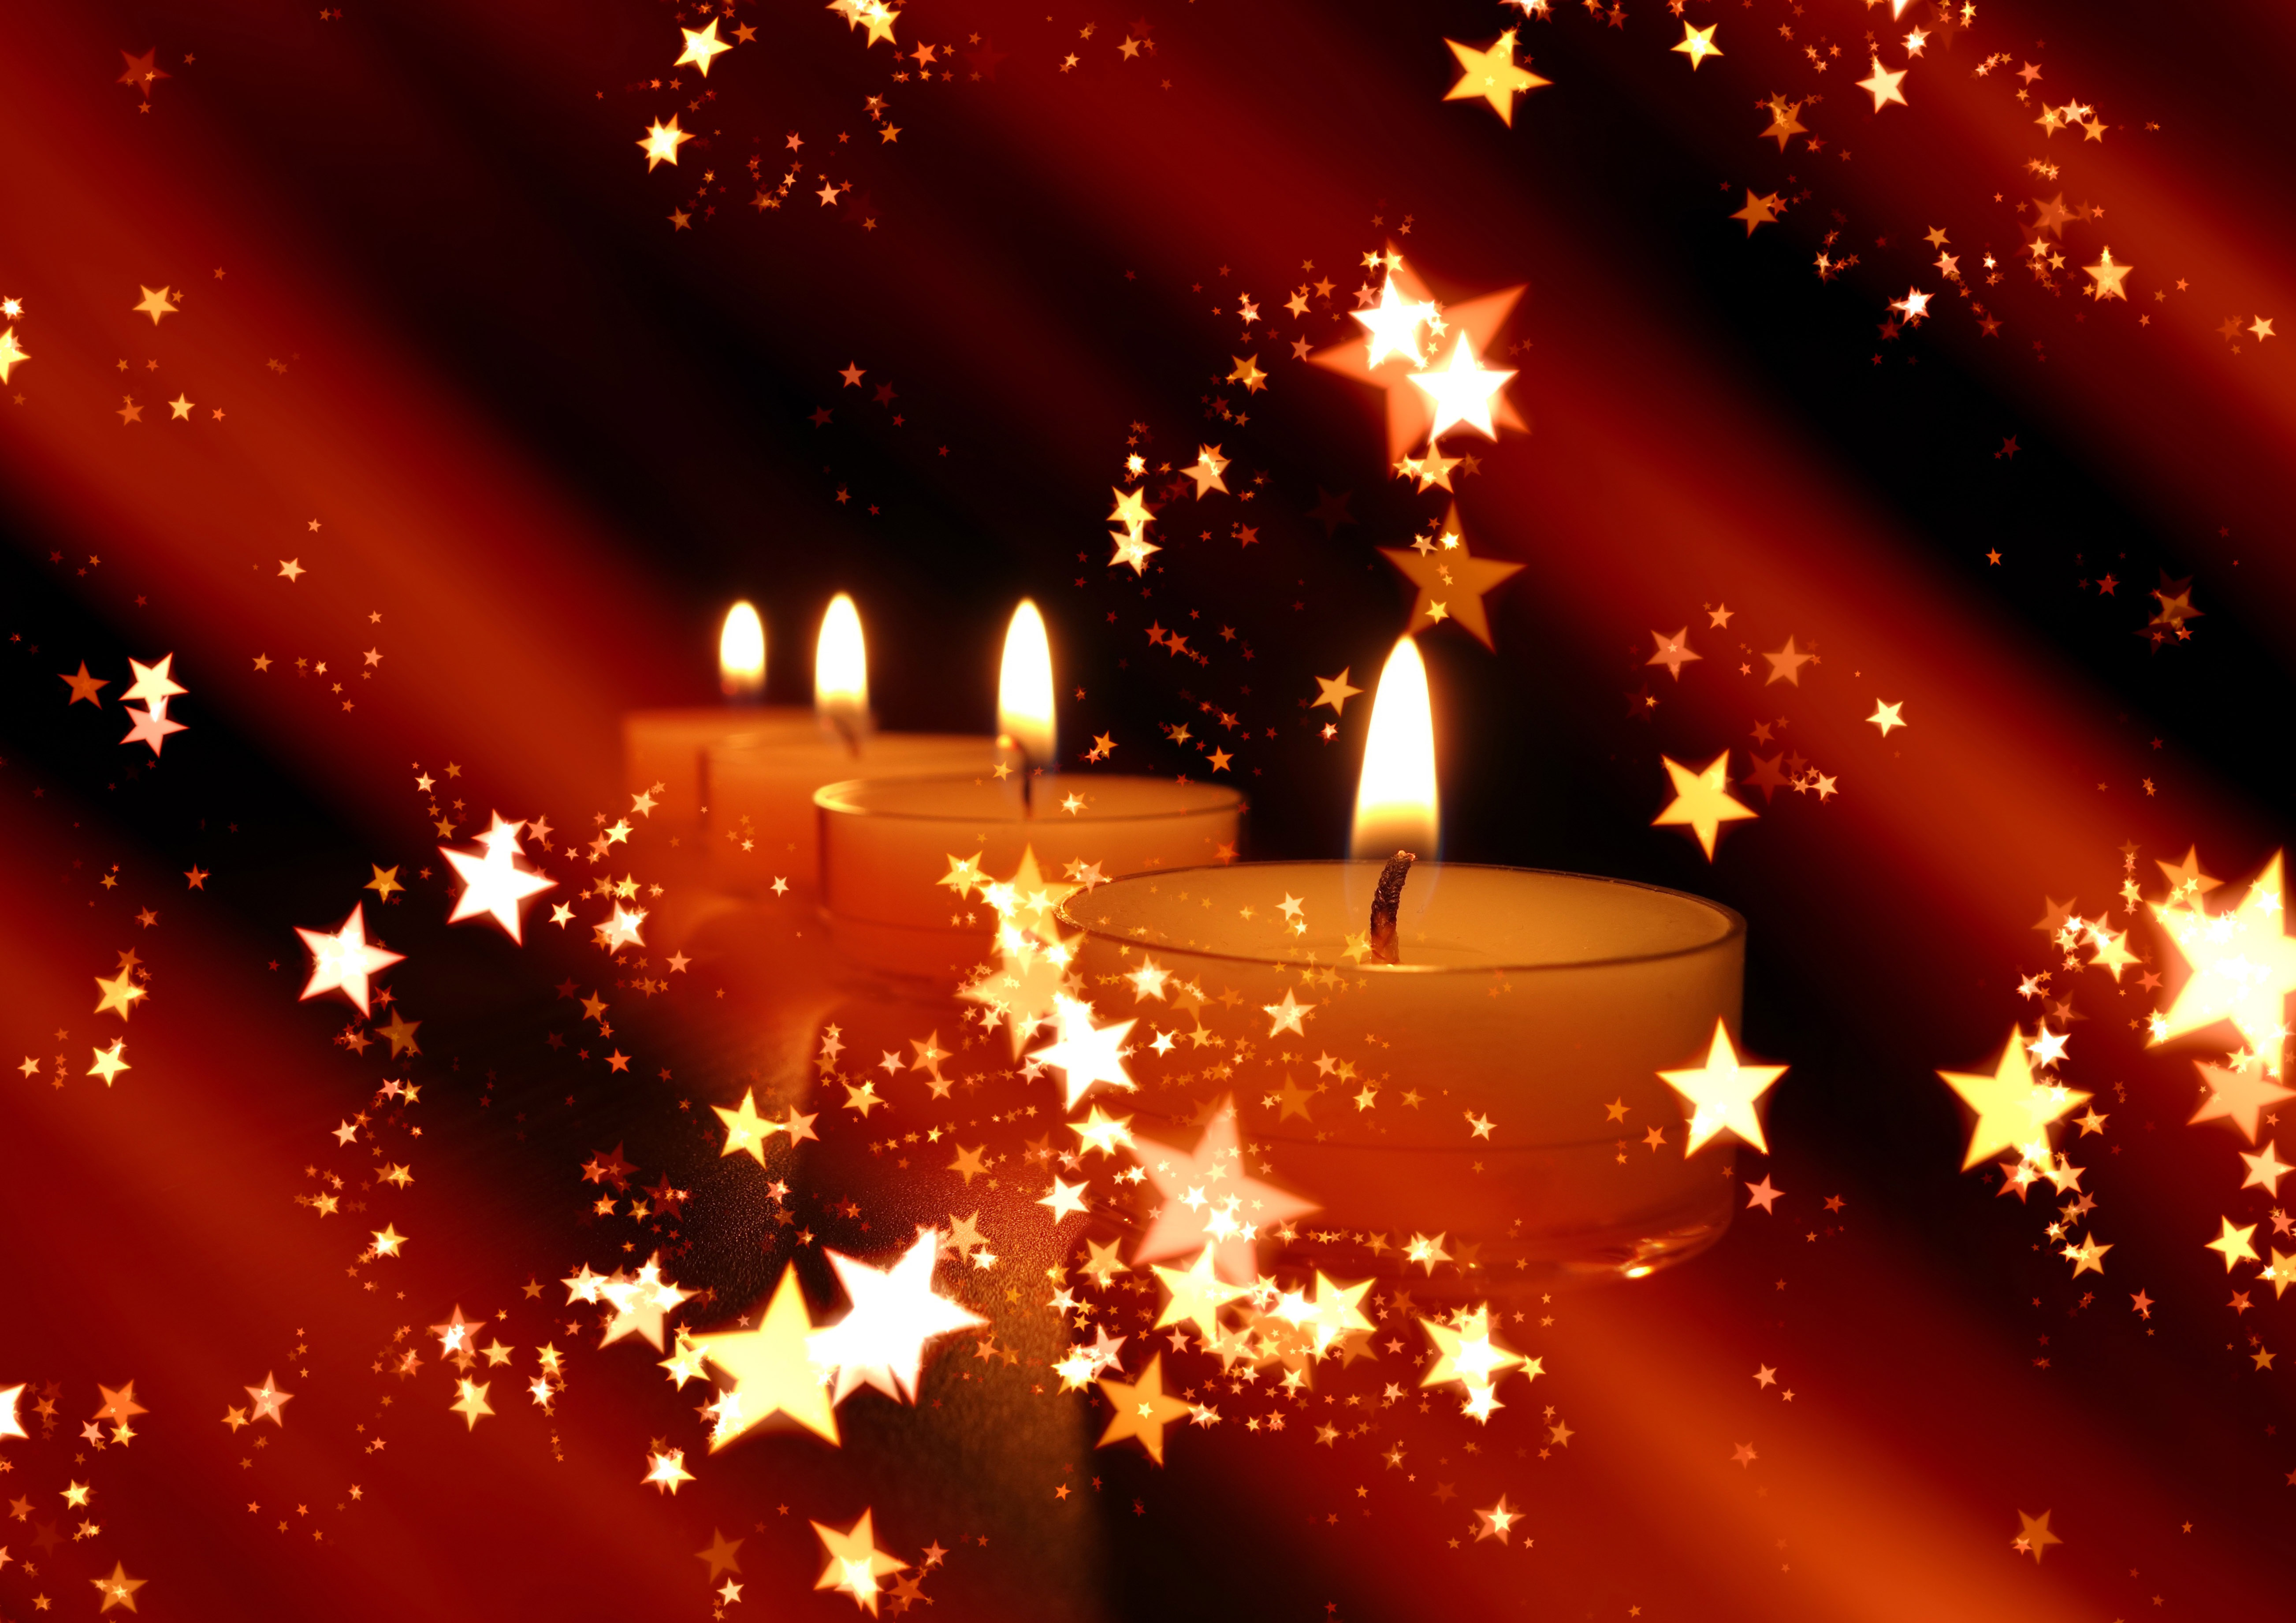 19 Great Candle Themed Free Christmas Wallpaper or Xmas ...